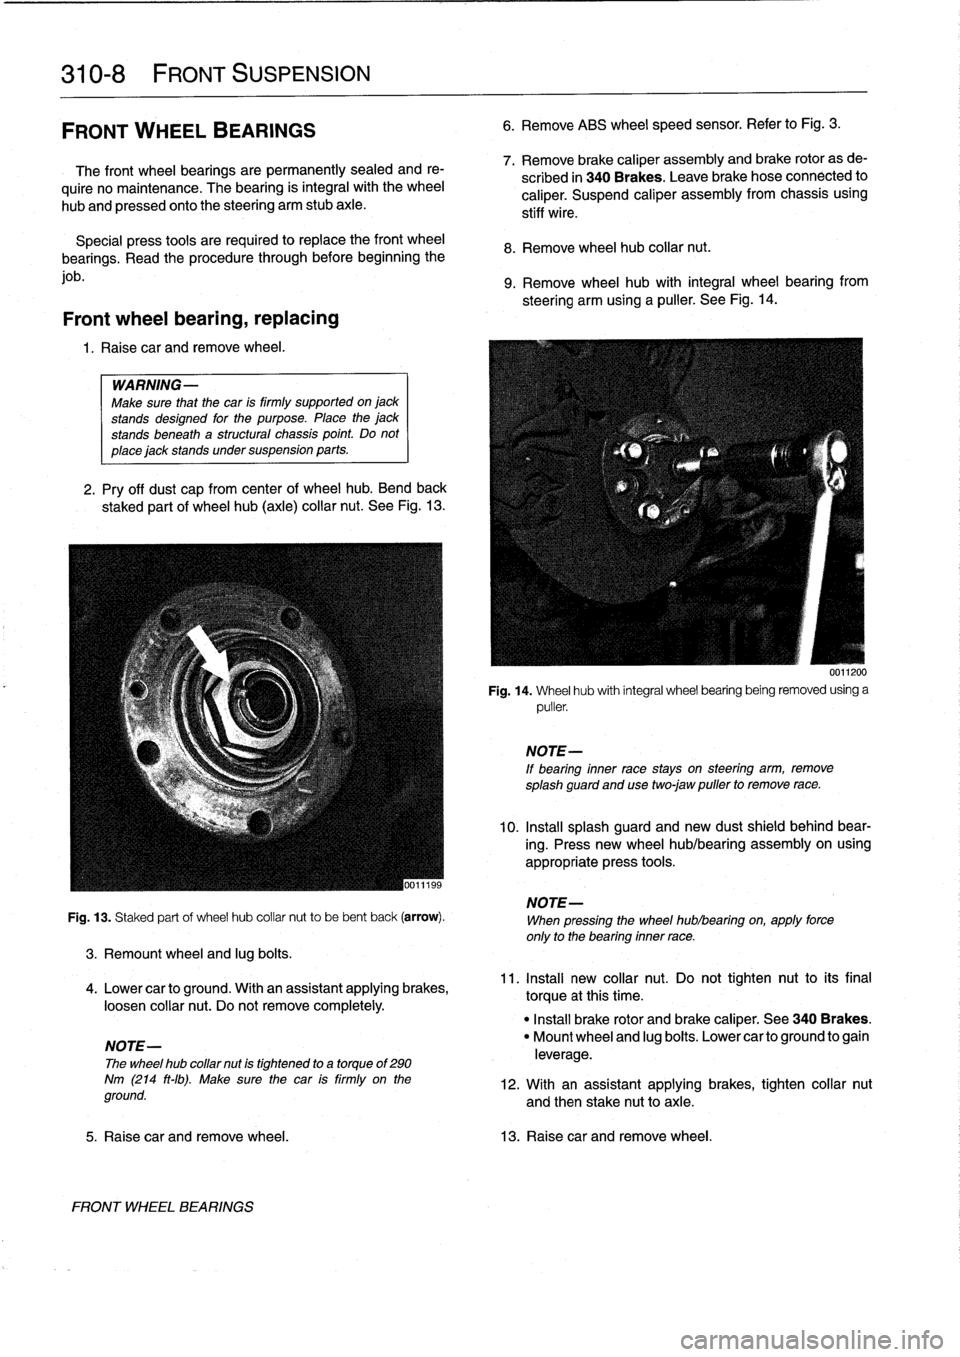 BMW 323i 1997 E36 Owners Guide 
310-
8

	

FRONT
SUSPENSION

FRONT
WHEEL
BEARINGS

The
front
wheel
bearings
are
permanently
sealed
and
re-

quire
no
maintenance
.
The
bearing
is
integral
with
the
wheel

hub
and
pressed
onto
the
ste